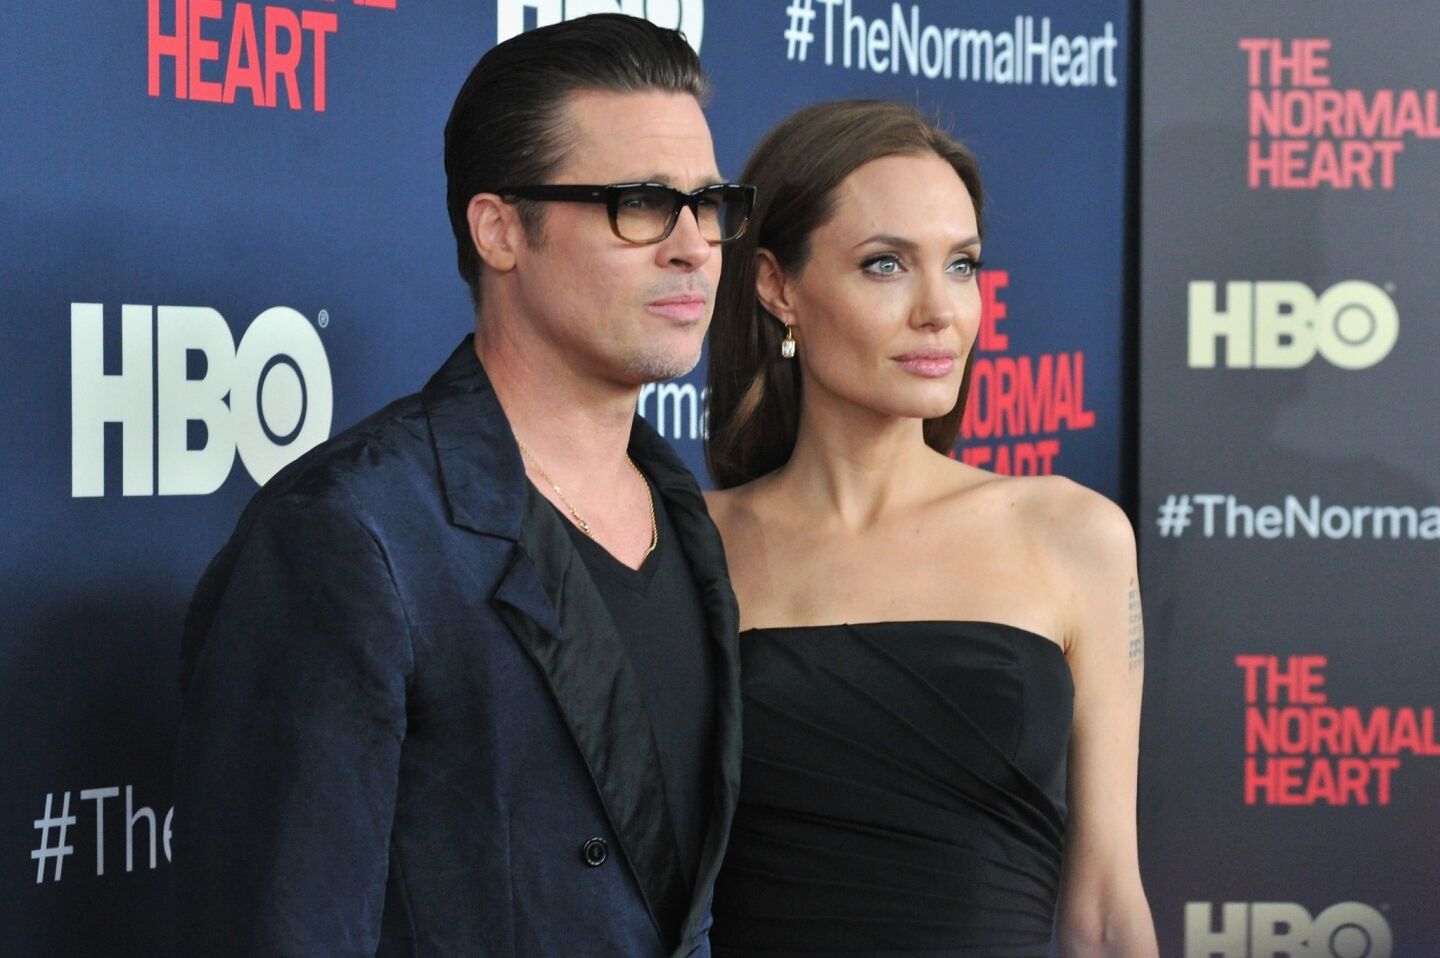 Brad Pitt and Angelina Jolie attend the New York premiere of "The Normal Heart" at Ziegfeld Theater on May 12, 2014, in New York City.